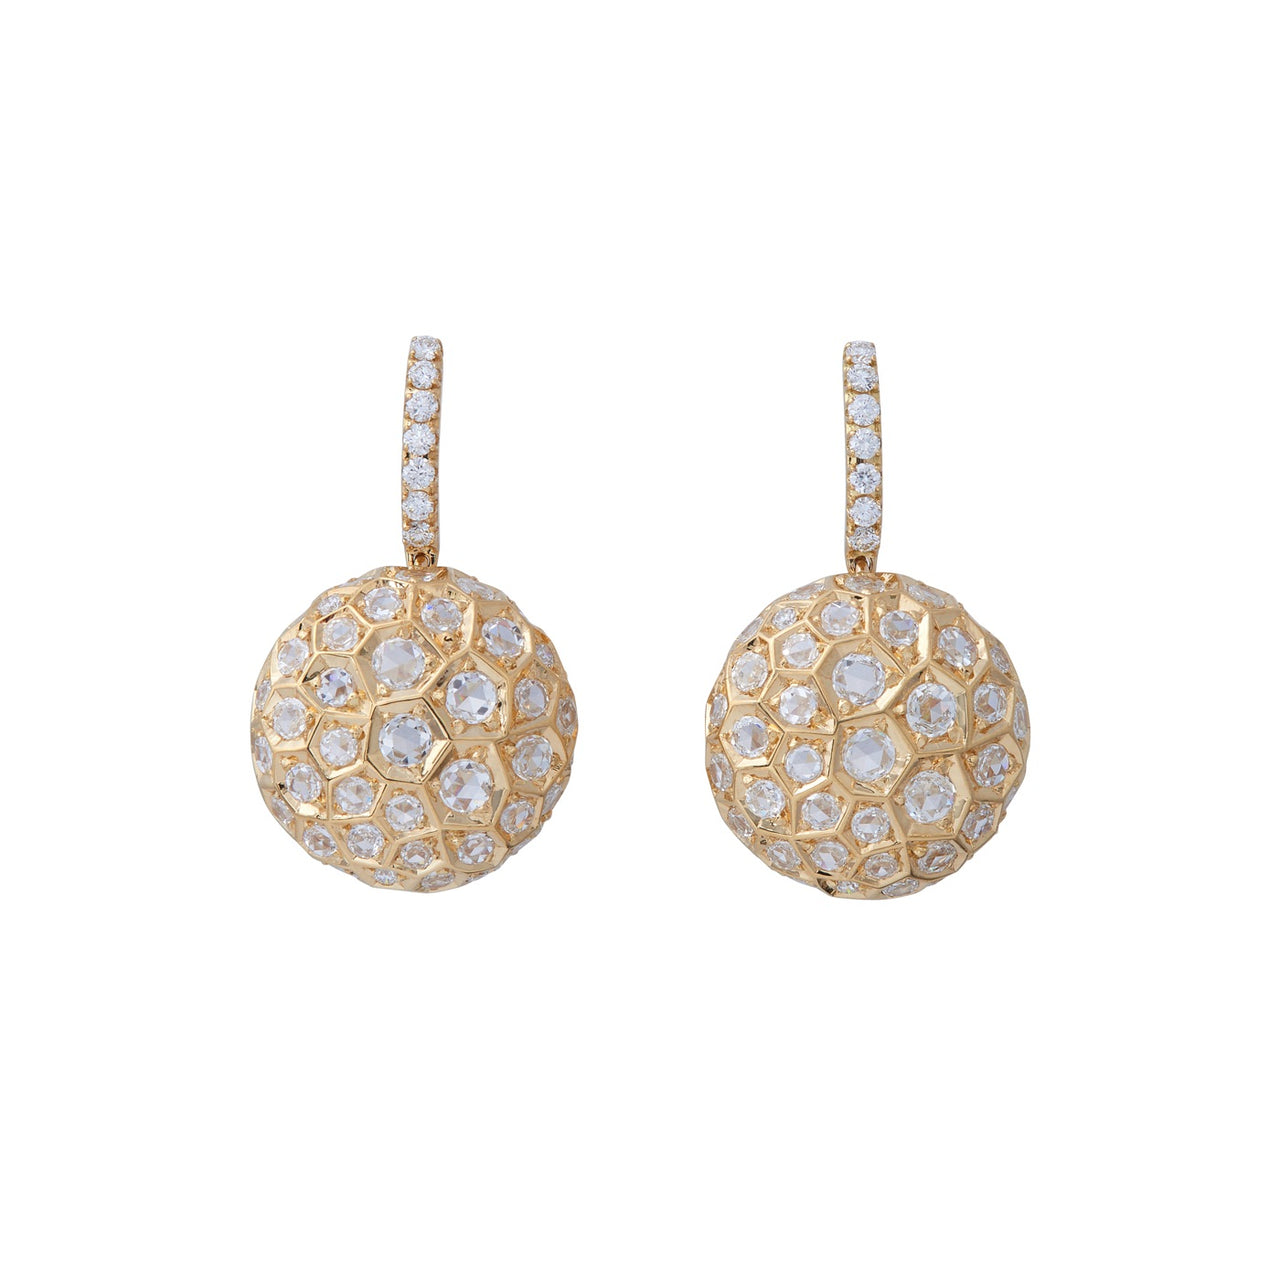 Honeycomb Earrings with Diamond Posted Top - Large